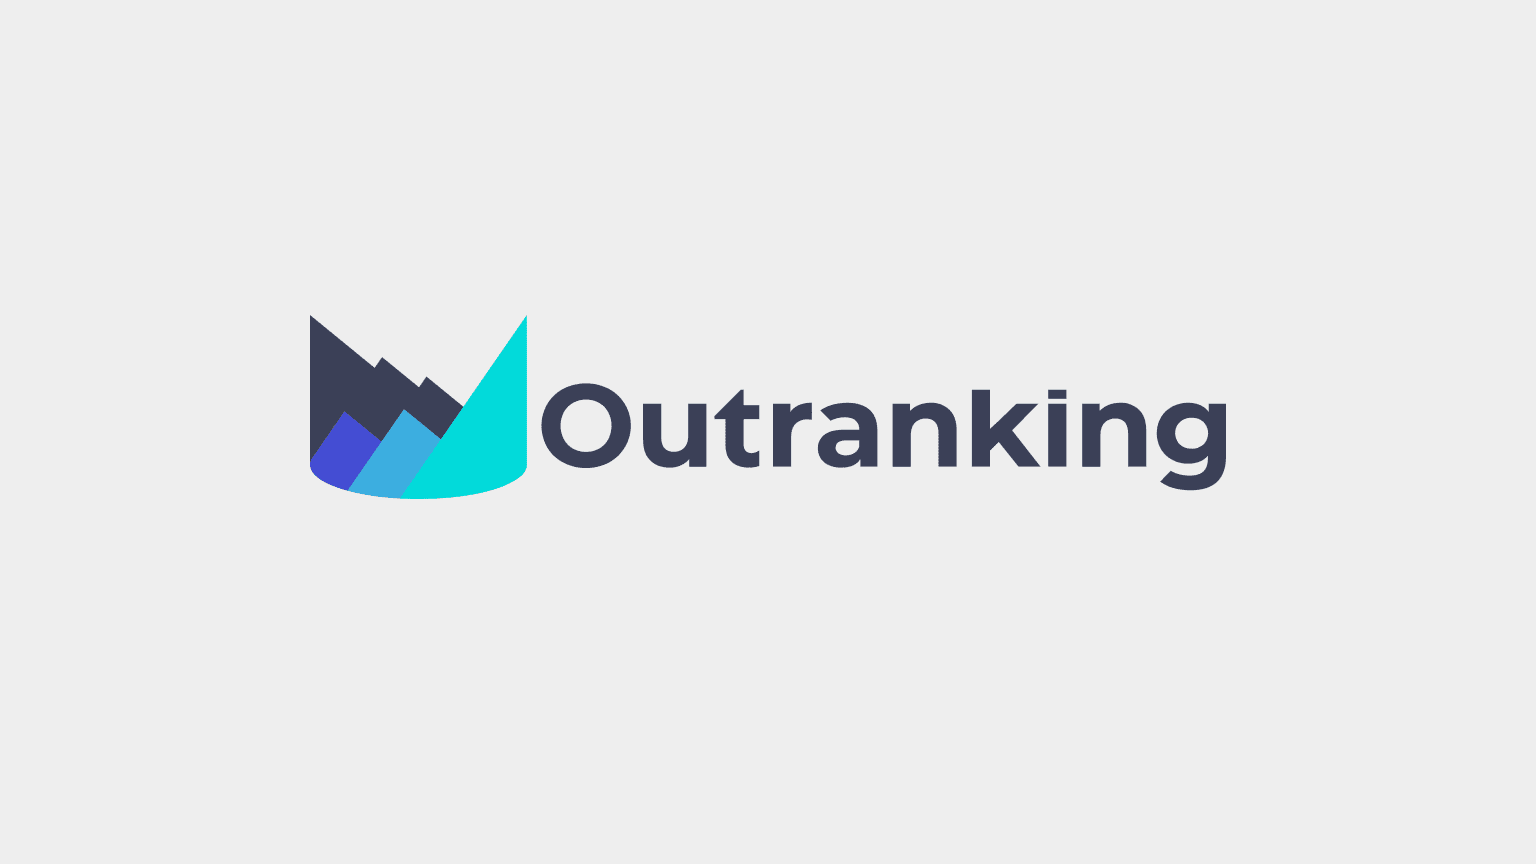 The outranking official logo